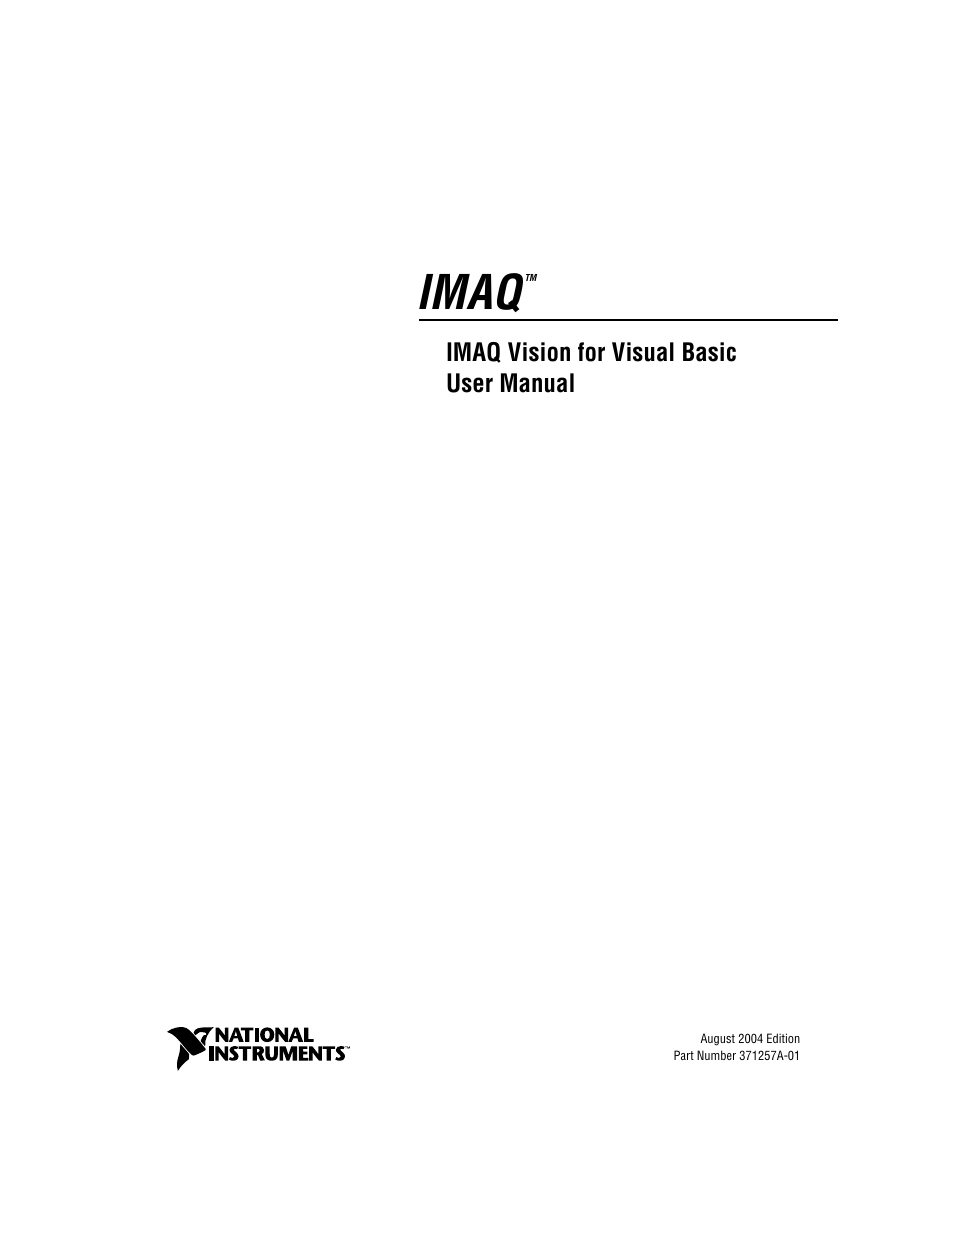 National Instruments IMAQTM User Manual | 121 pages